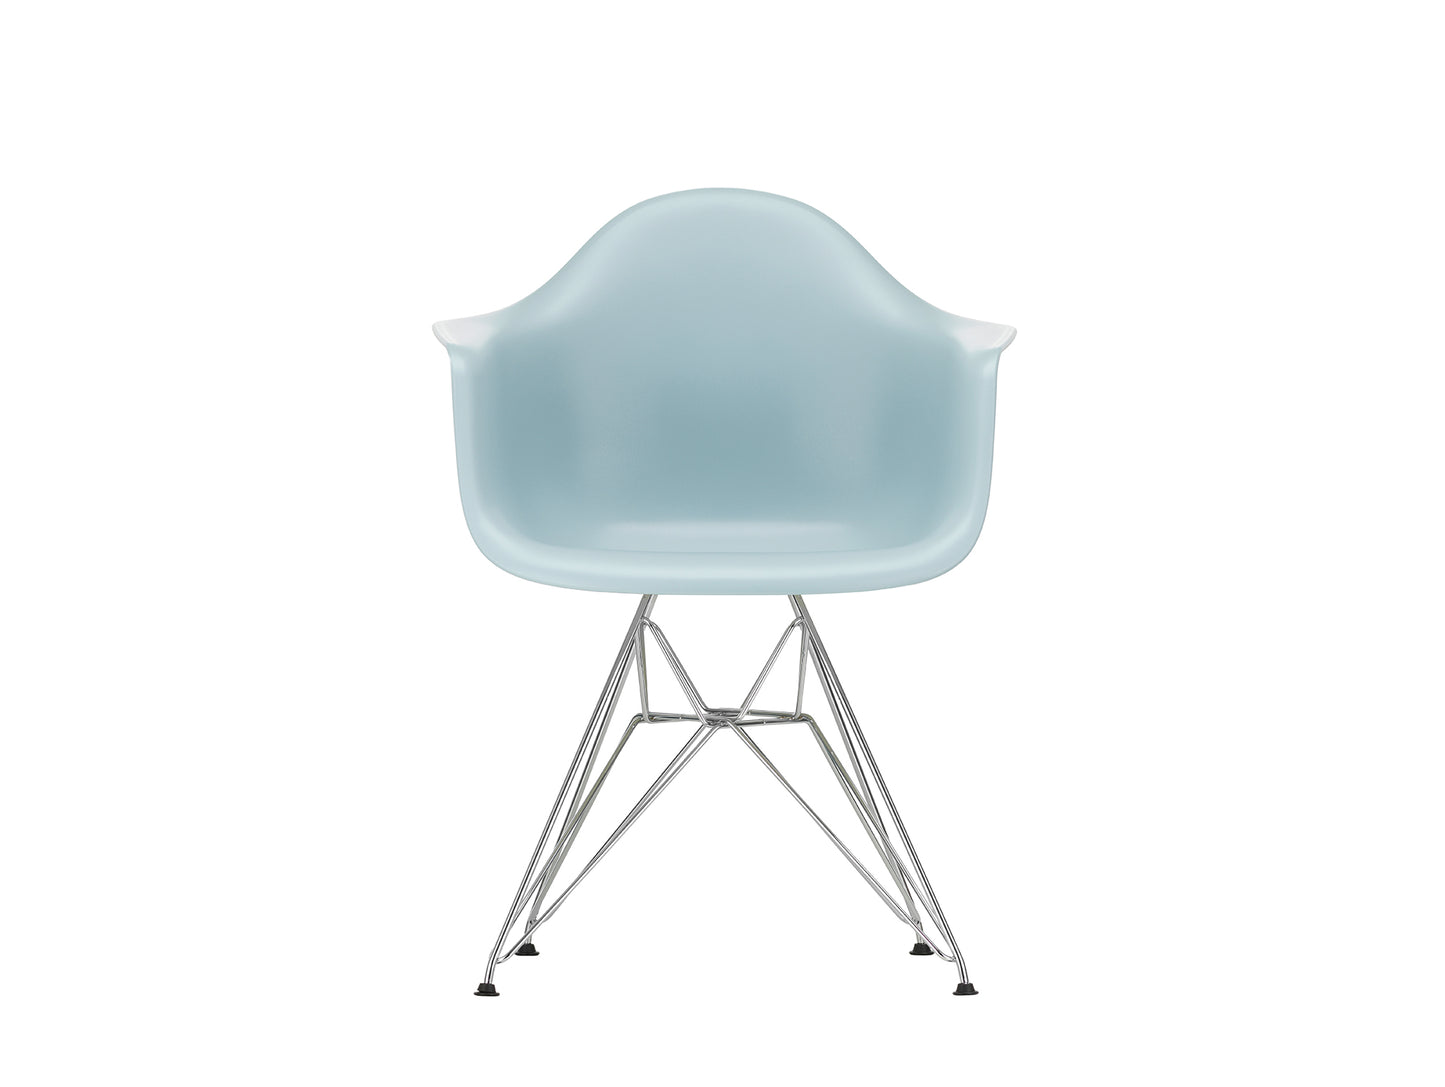 Eames DAR Plastic Armchair RE by Vitra - 23 Ice Grey Shell / Chrome Base